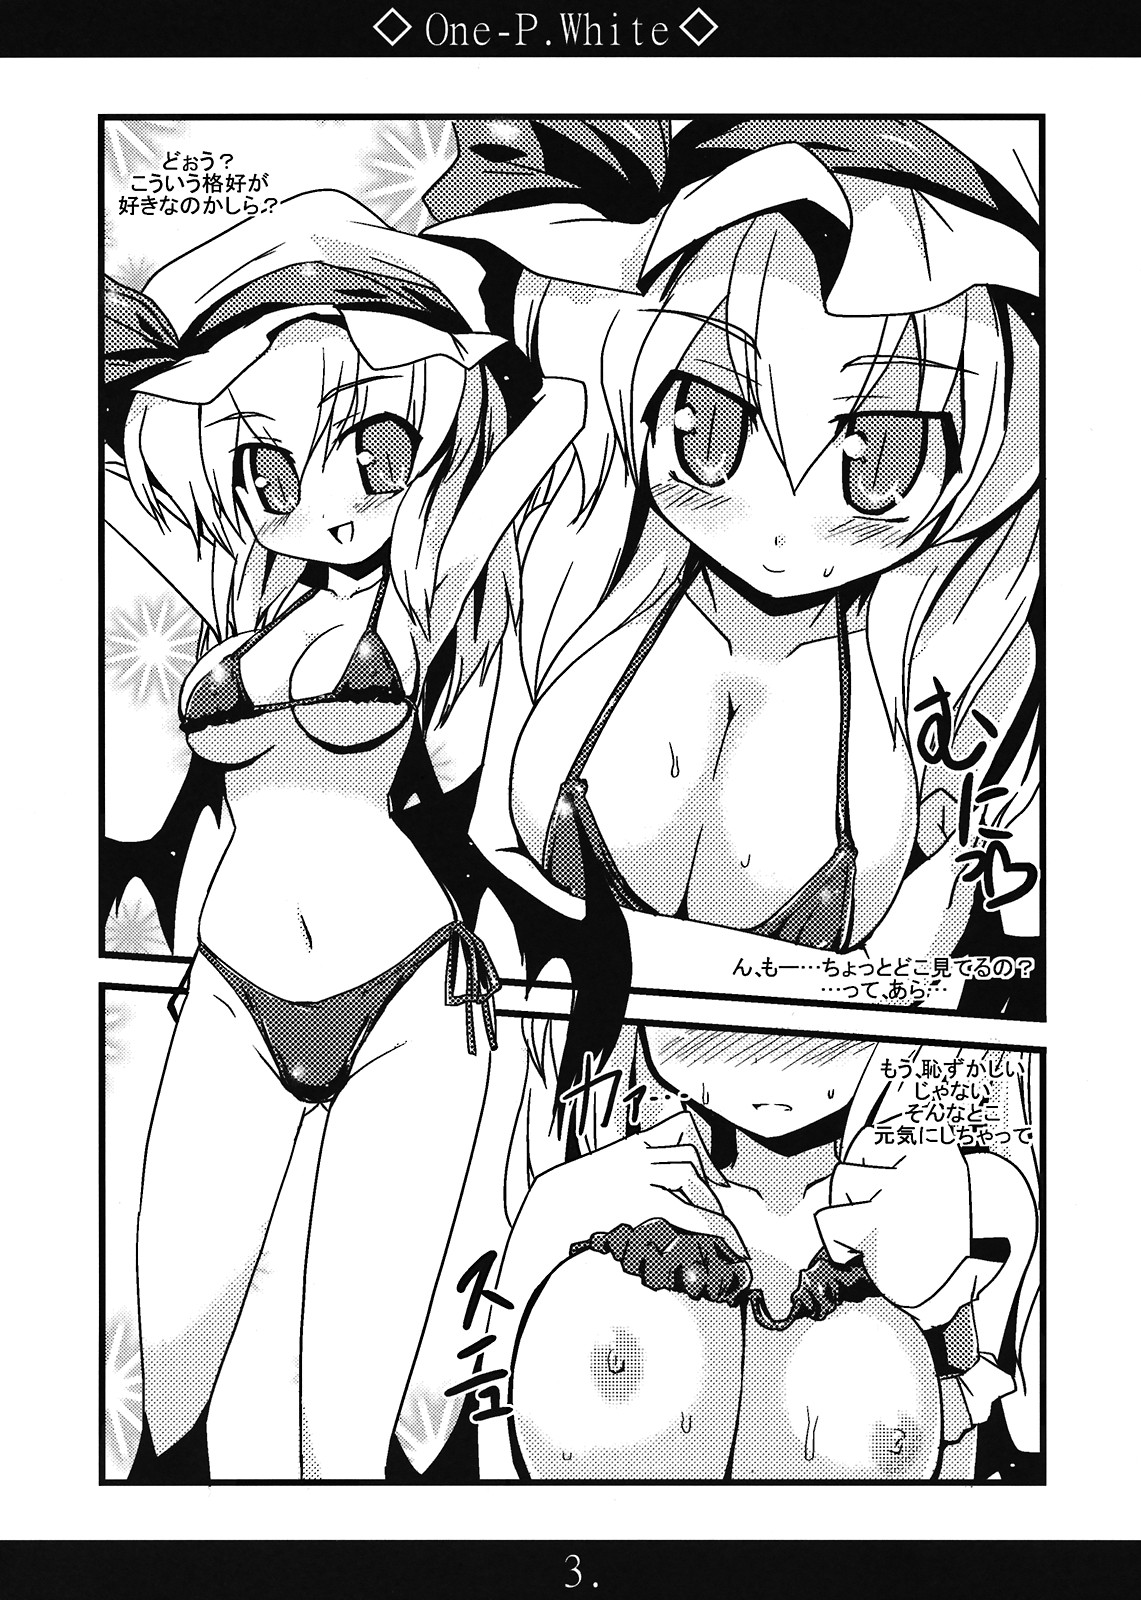 [MarineSapphire (Hasumi Milk)] One-P.White (Touhou Project) page 3 full